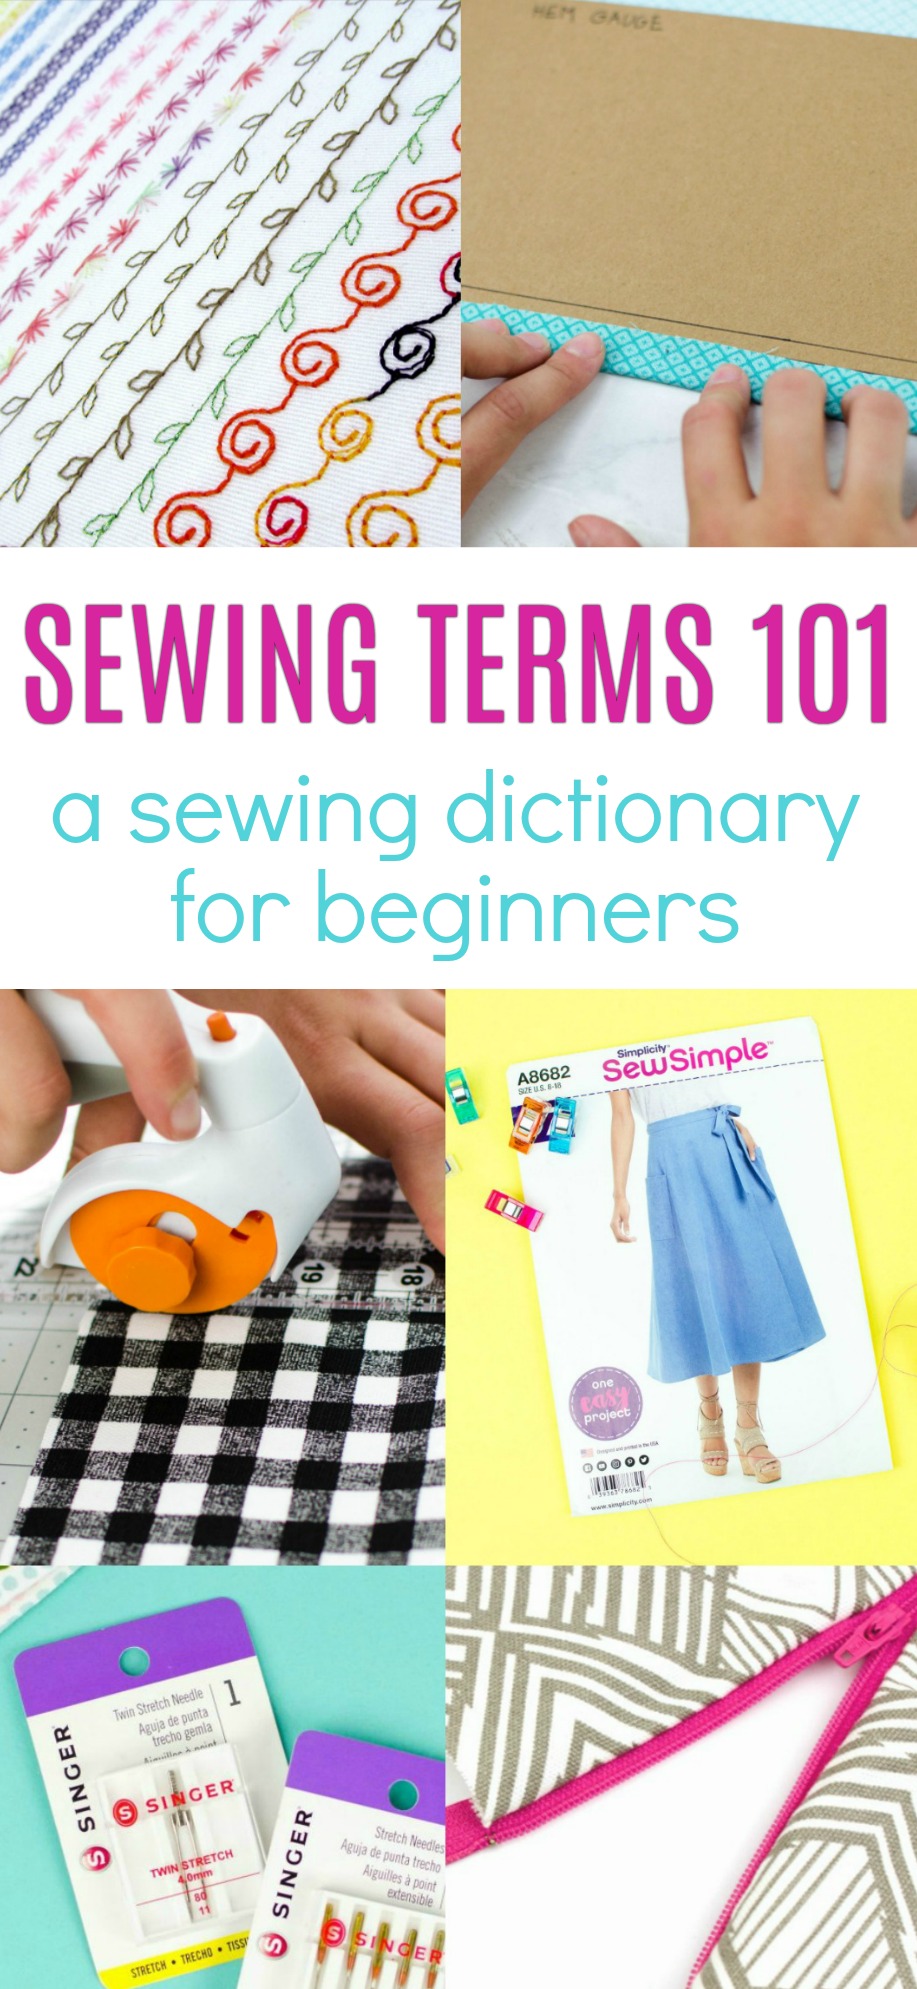 sewing-terms-for-beginners-basically-a-sewing-dictionary